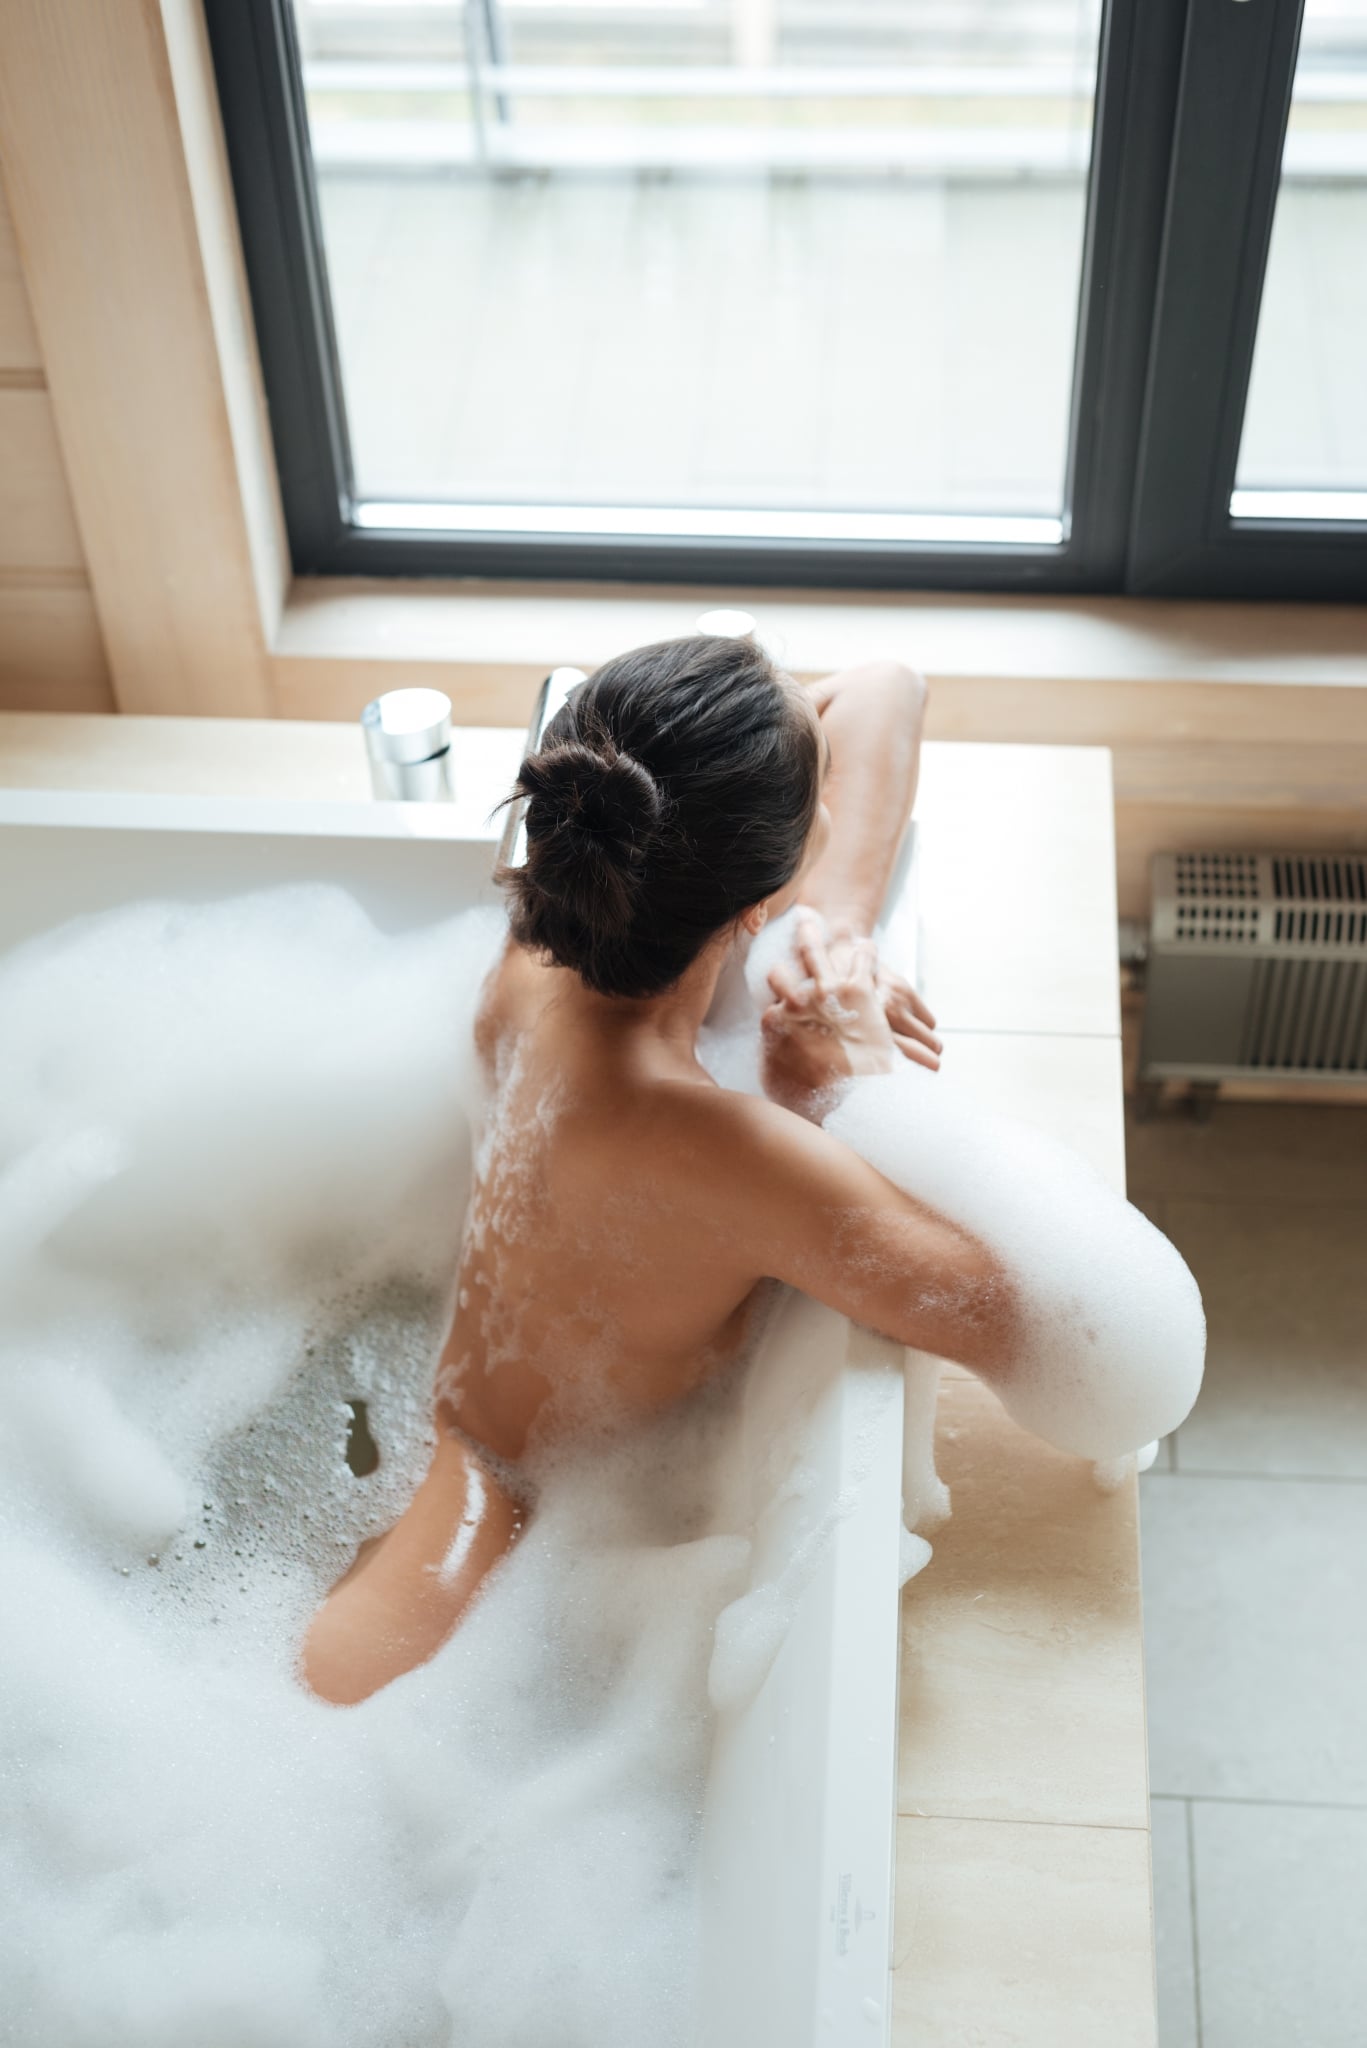 attractive naked young woman sitting in bathtub PR4NMR4